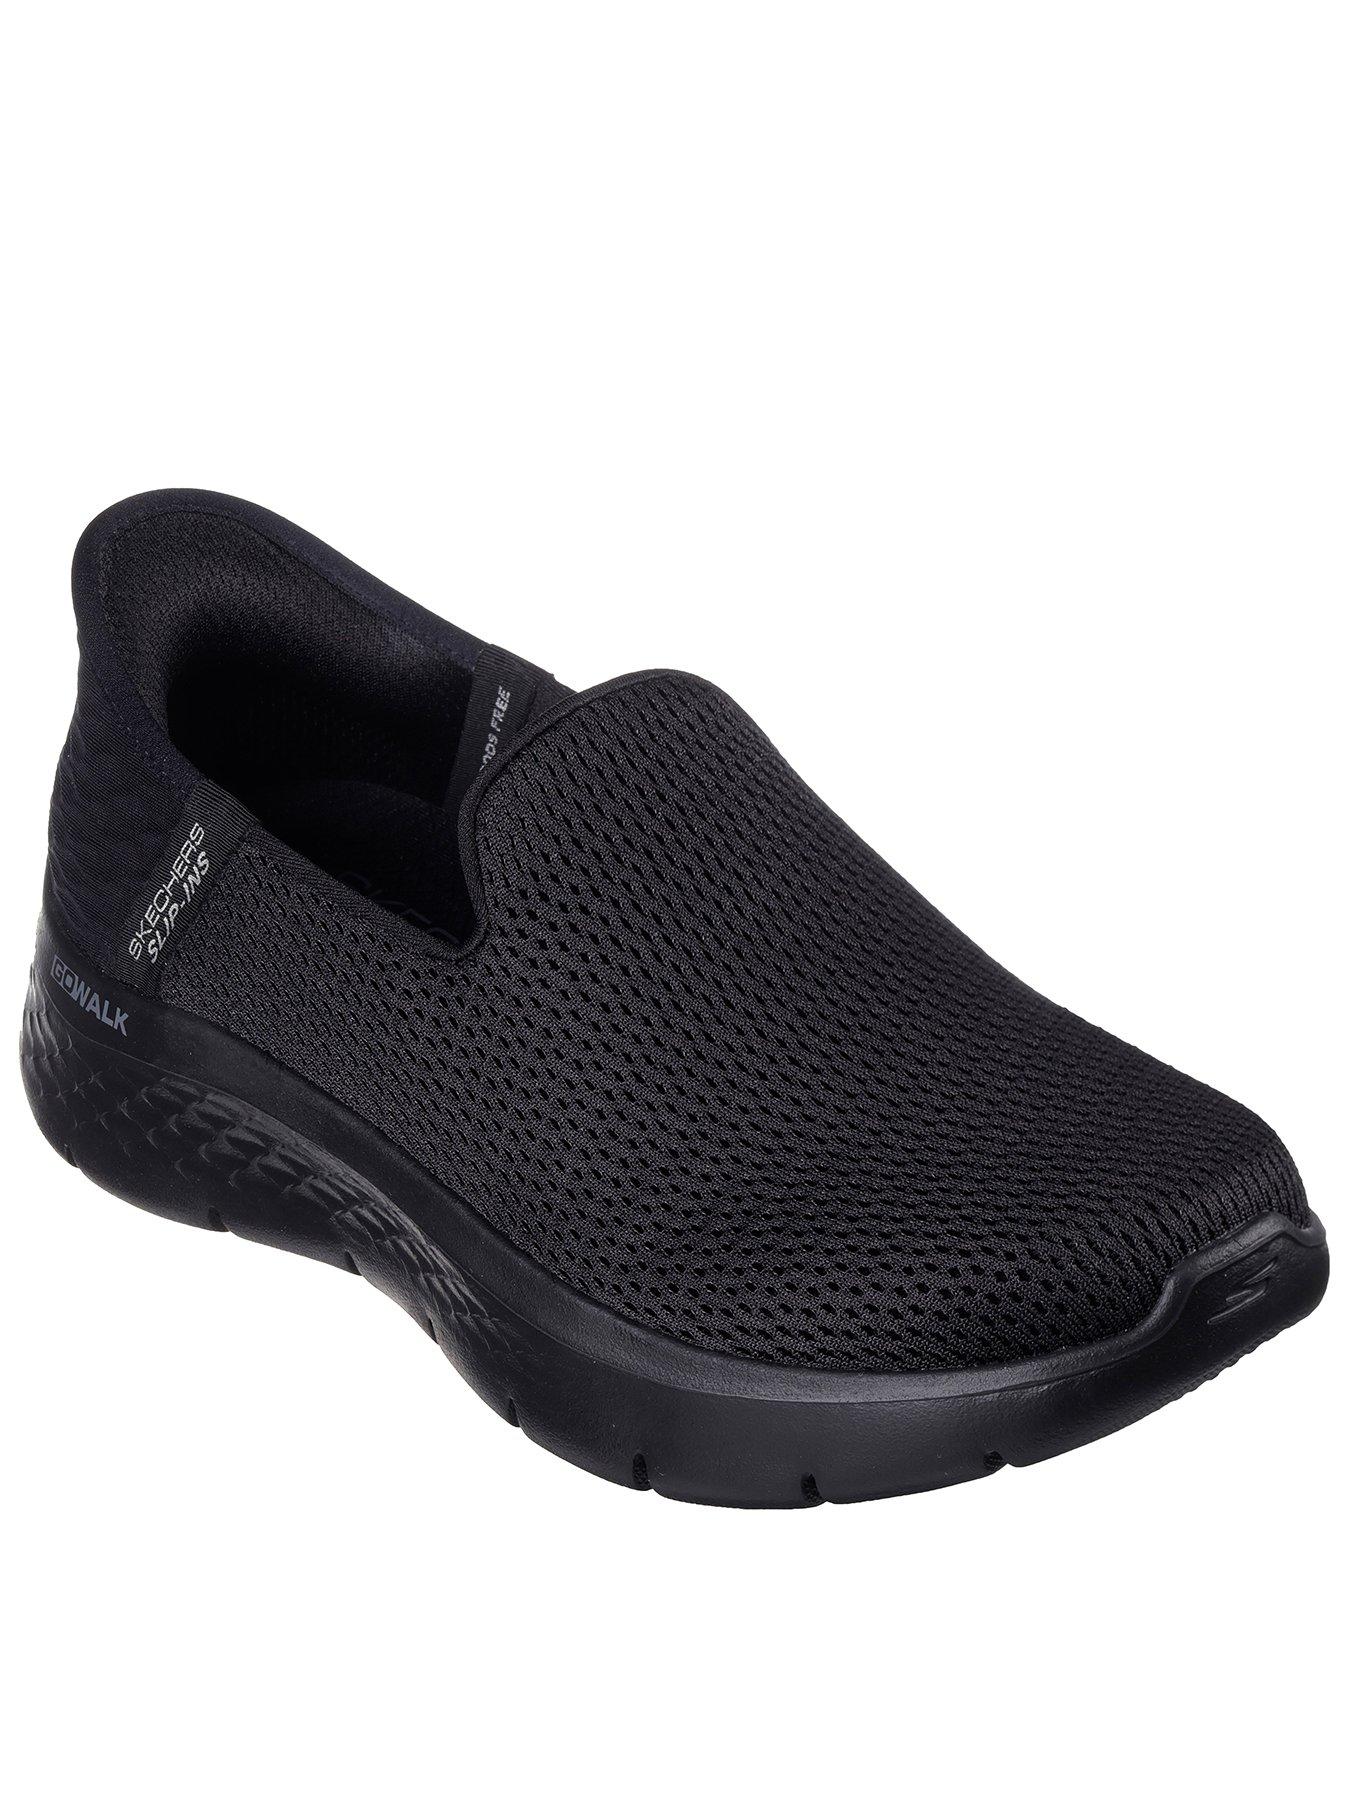 Ladies Skechers Go Flex-ABILITY *SPECIAL OFFER*WAS £50 Size UK 3,4